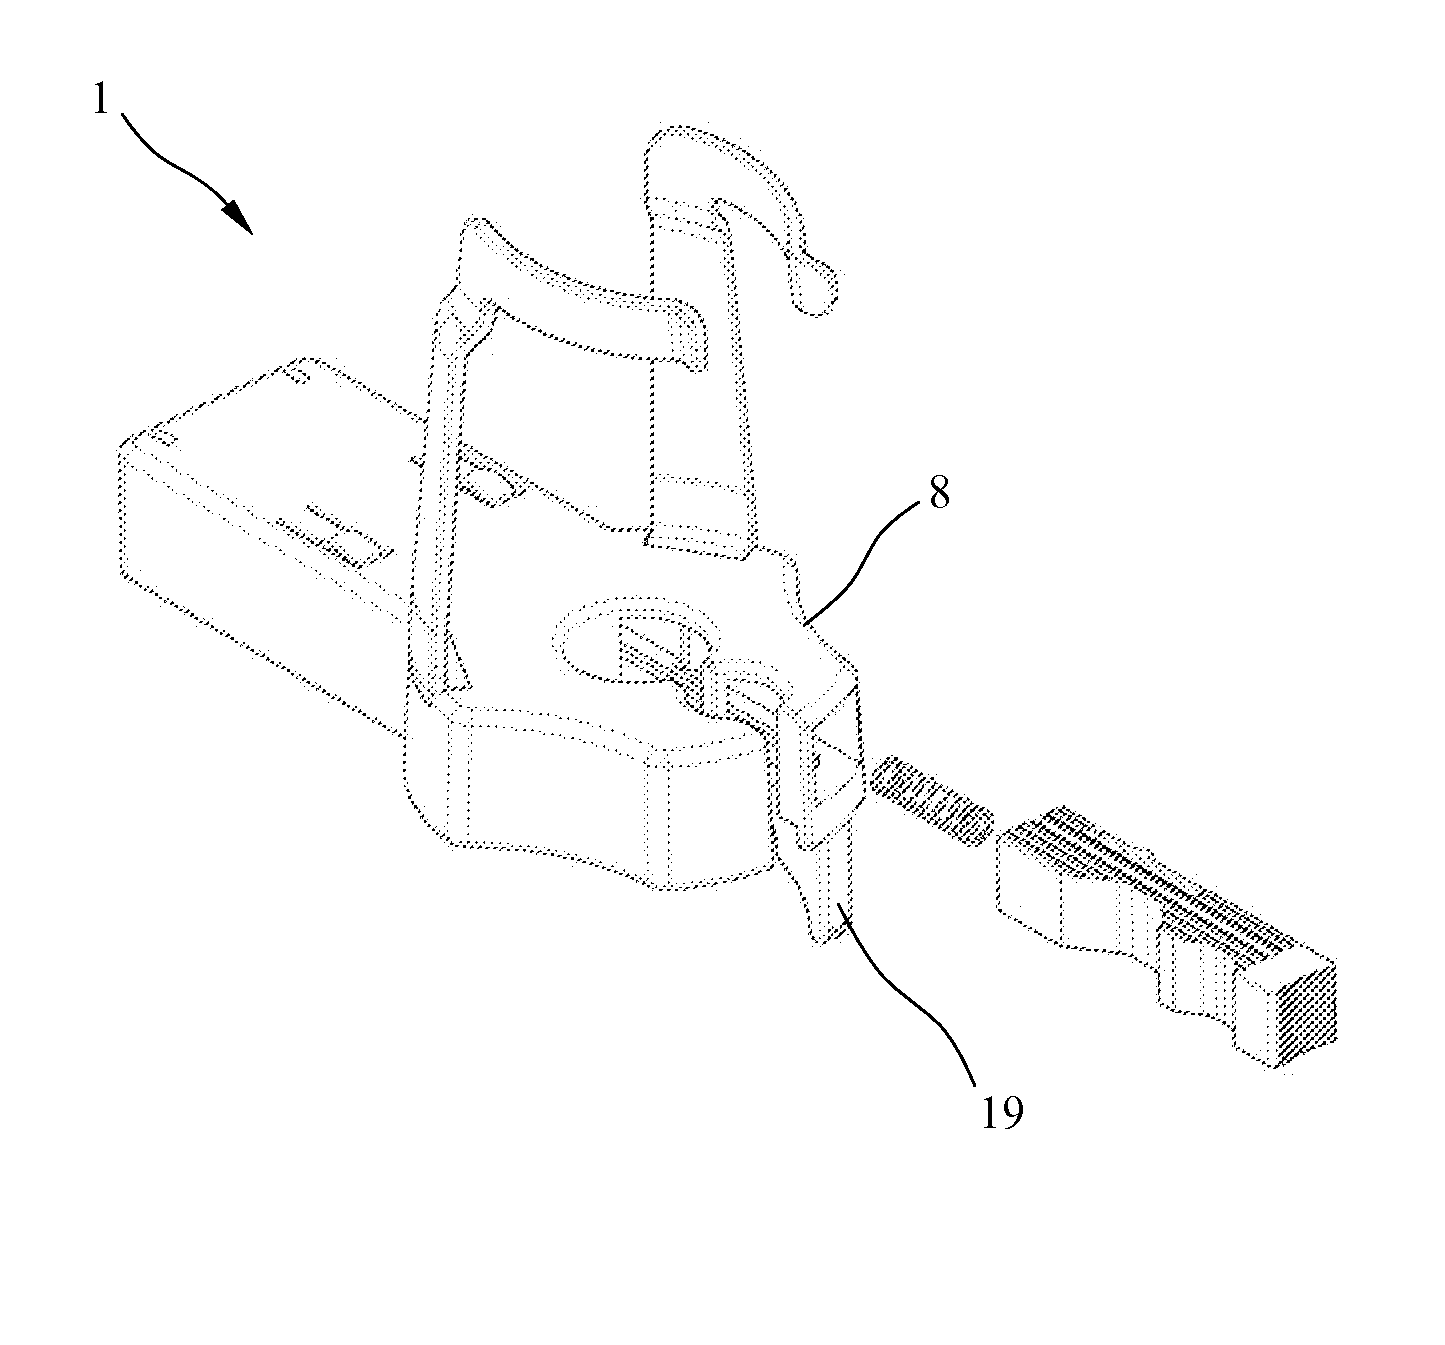 Bottle support for an injection or infusion device